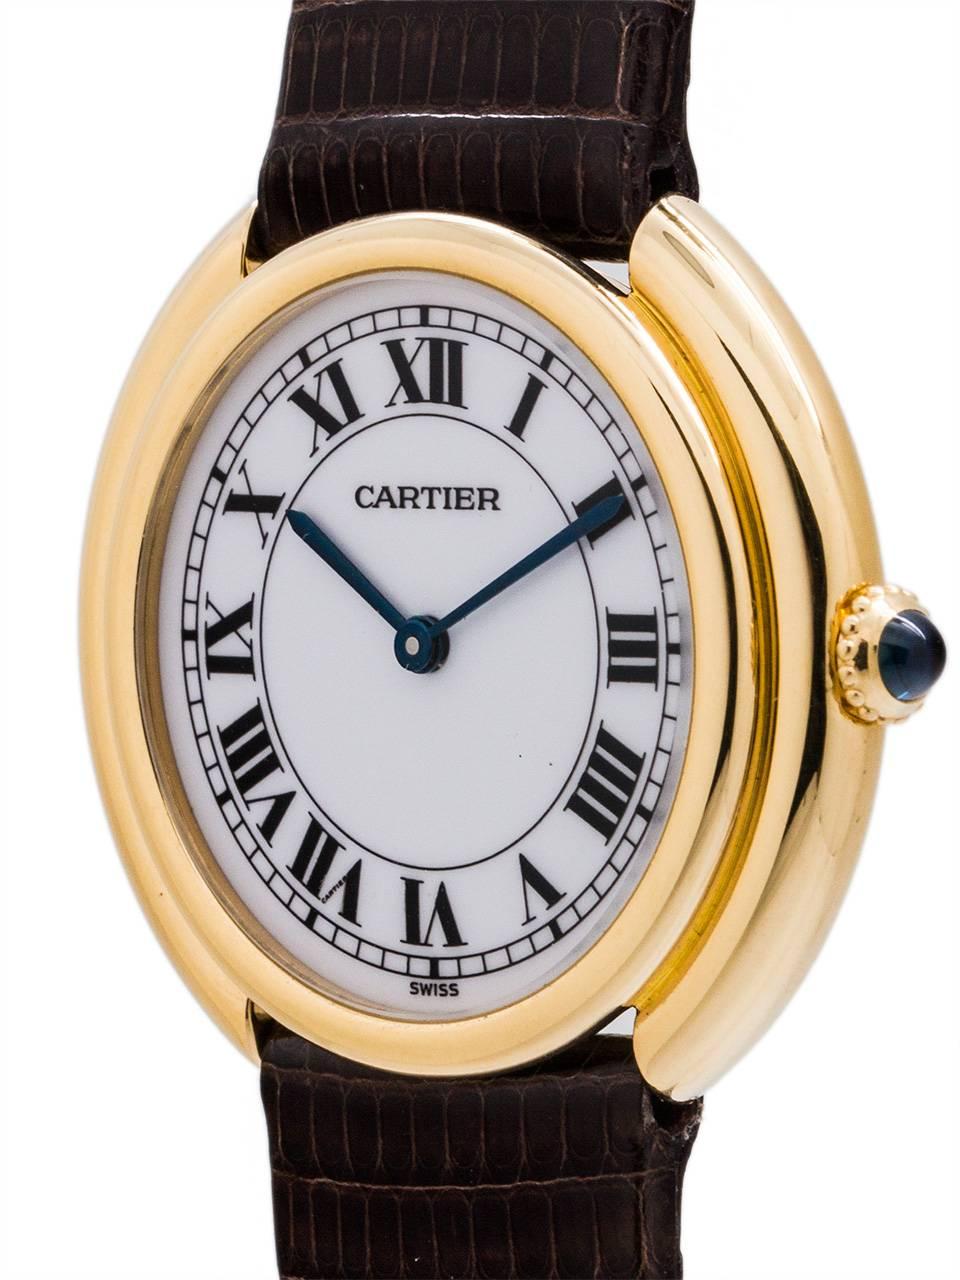 Cartier Tank 18K Gold “Vendome” circa 1980’s. Man’s 33 x 32mm round case with rounded stepped case design. Featuring white hard enamel dial with classic Cartier Roman figures, blued steel hands, and powered by 17 jewel manual wind movement with